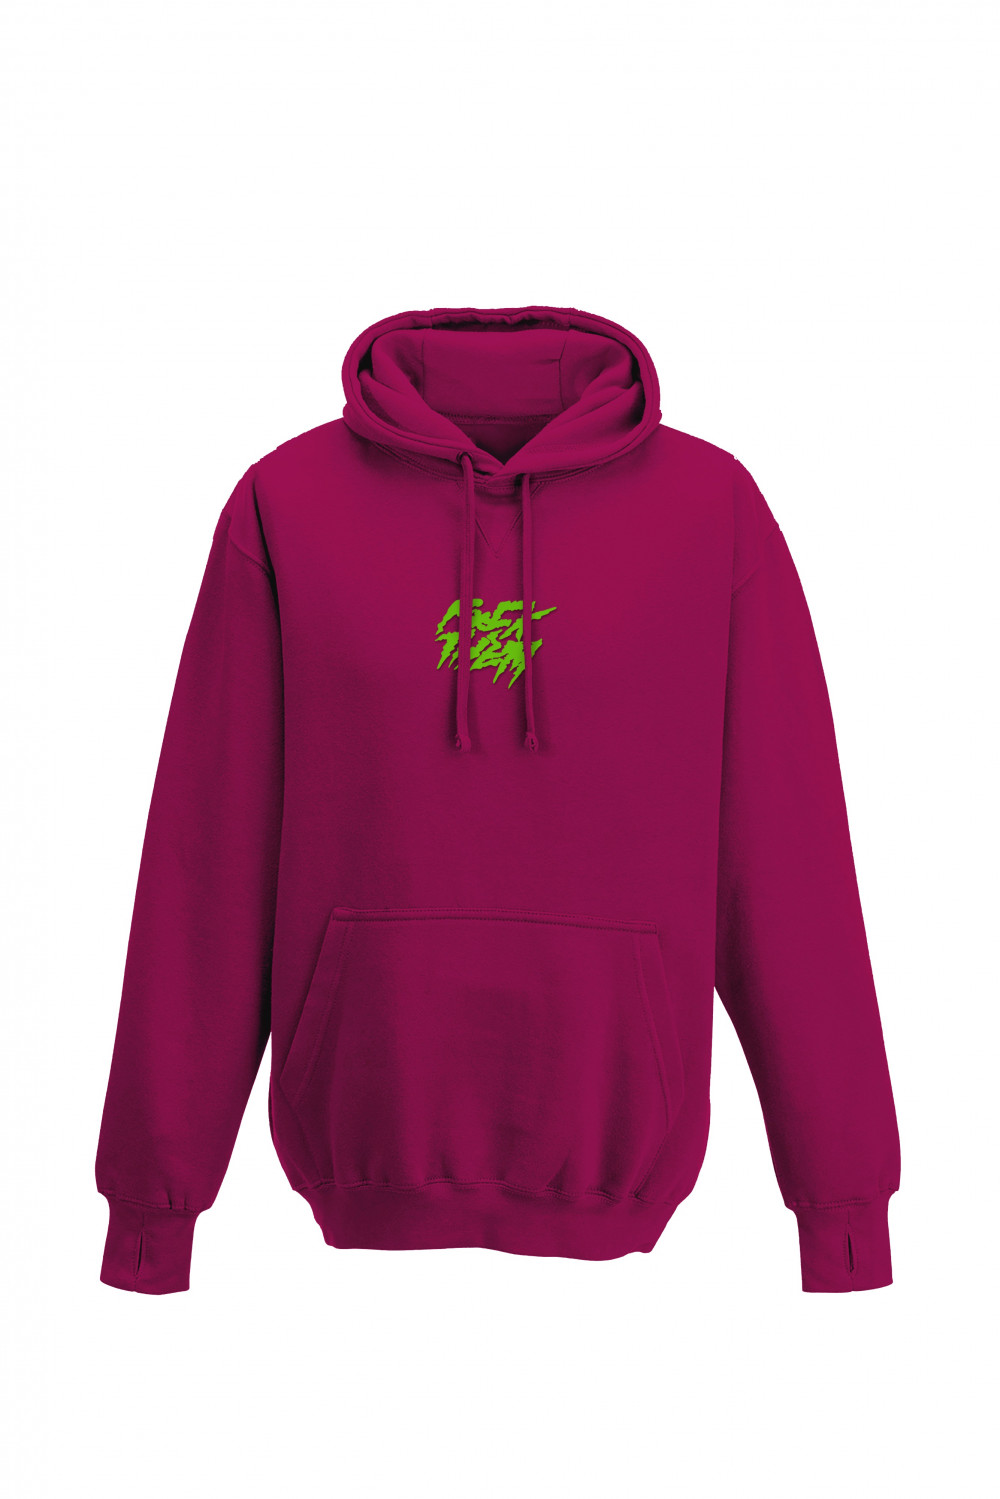 Pink/green winter pt.2 (limited)